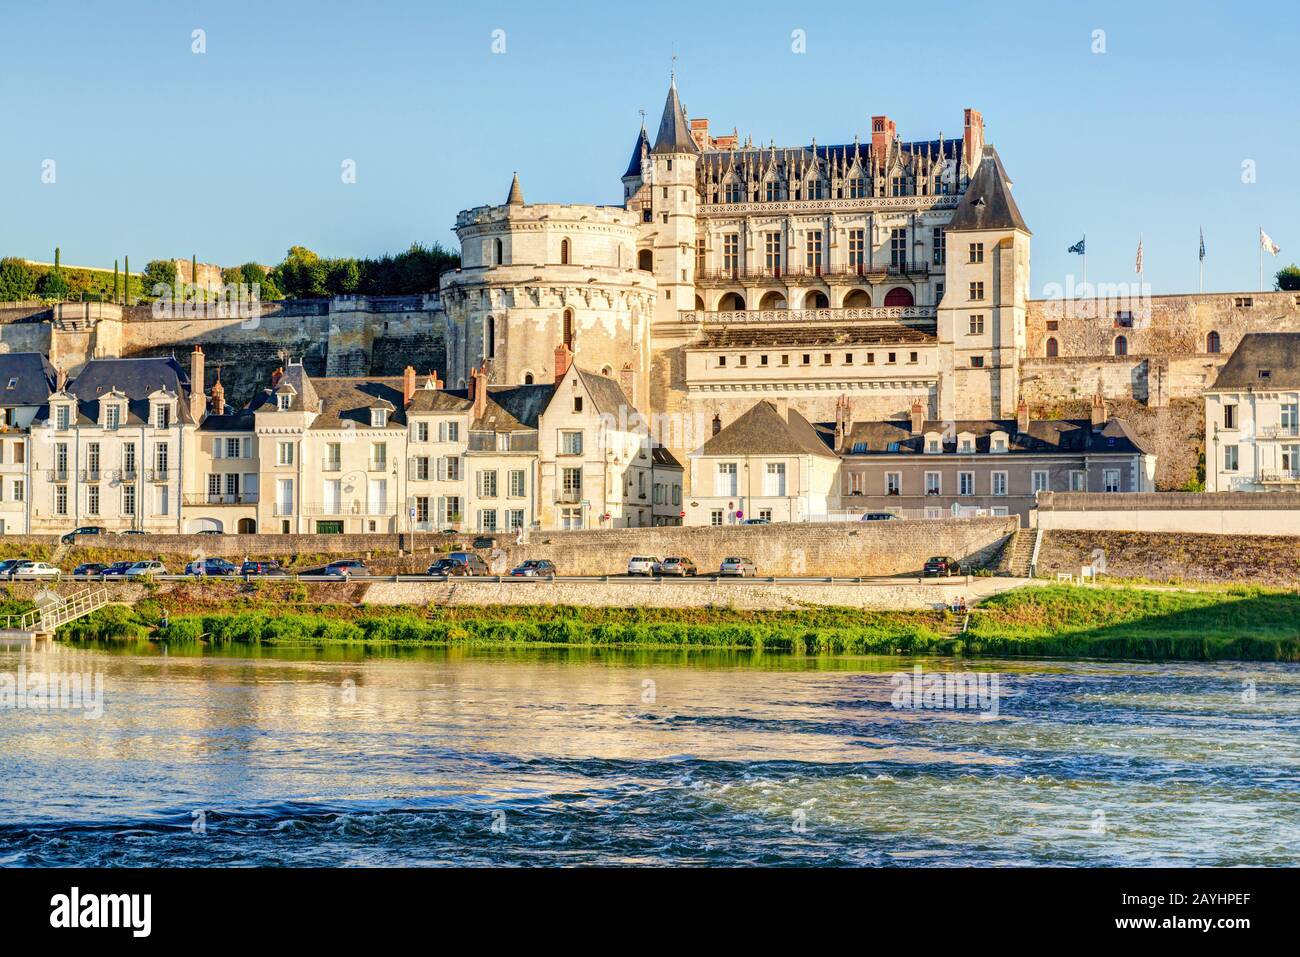 Chateau d`Amboise, France. This royal castle is located in Amboise in the Loire Valley, was built in the 15th century and is a tourist attraction. Stock Photo